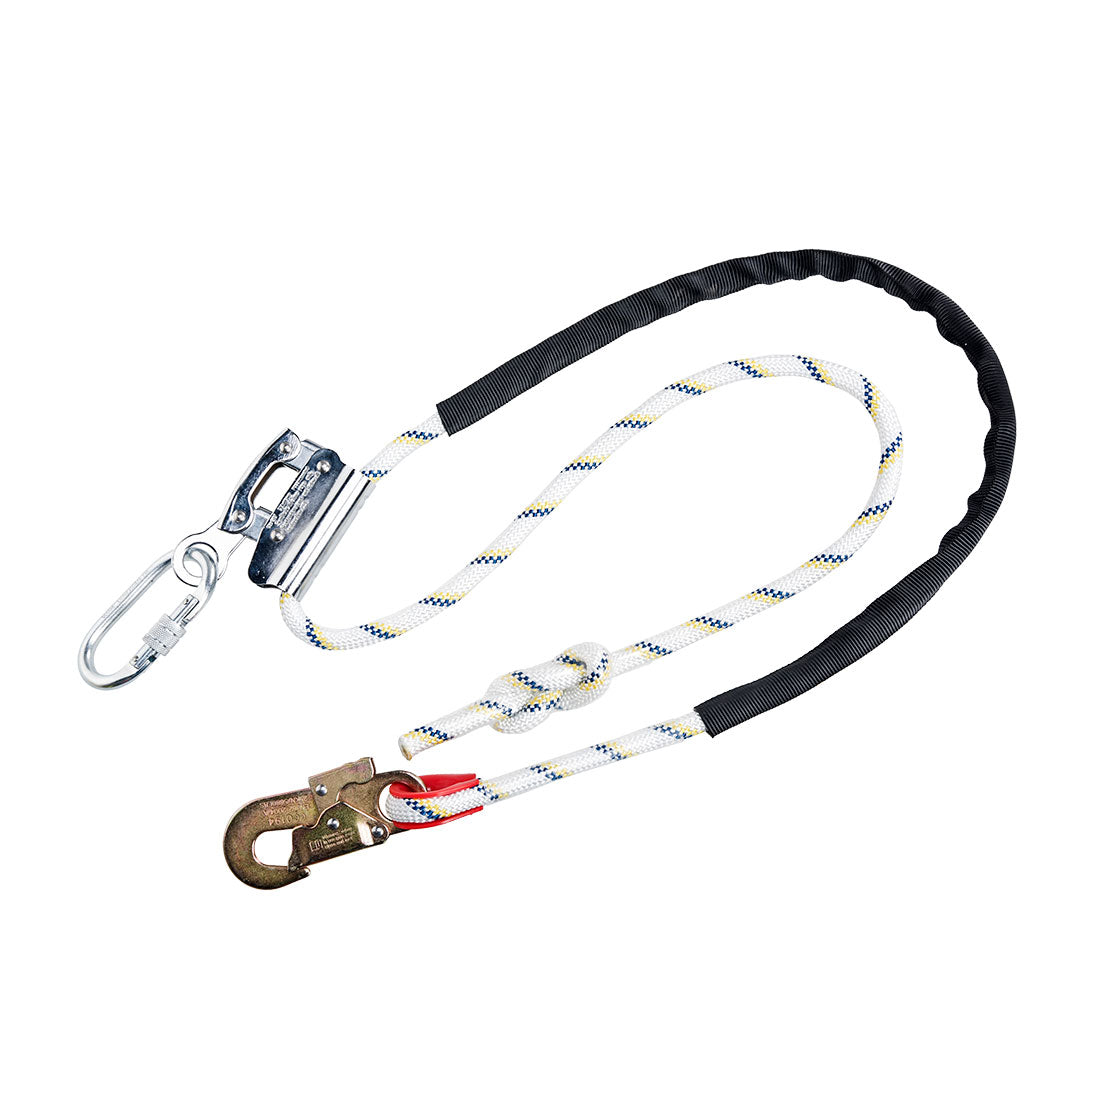 Portwest Work Positioning 2m Lanyard with Grip Adjuster